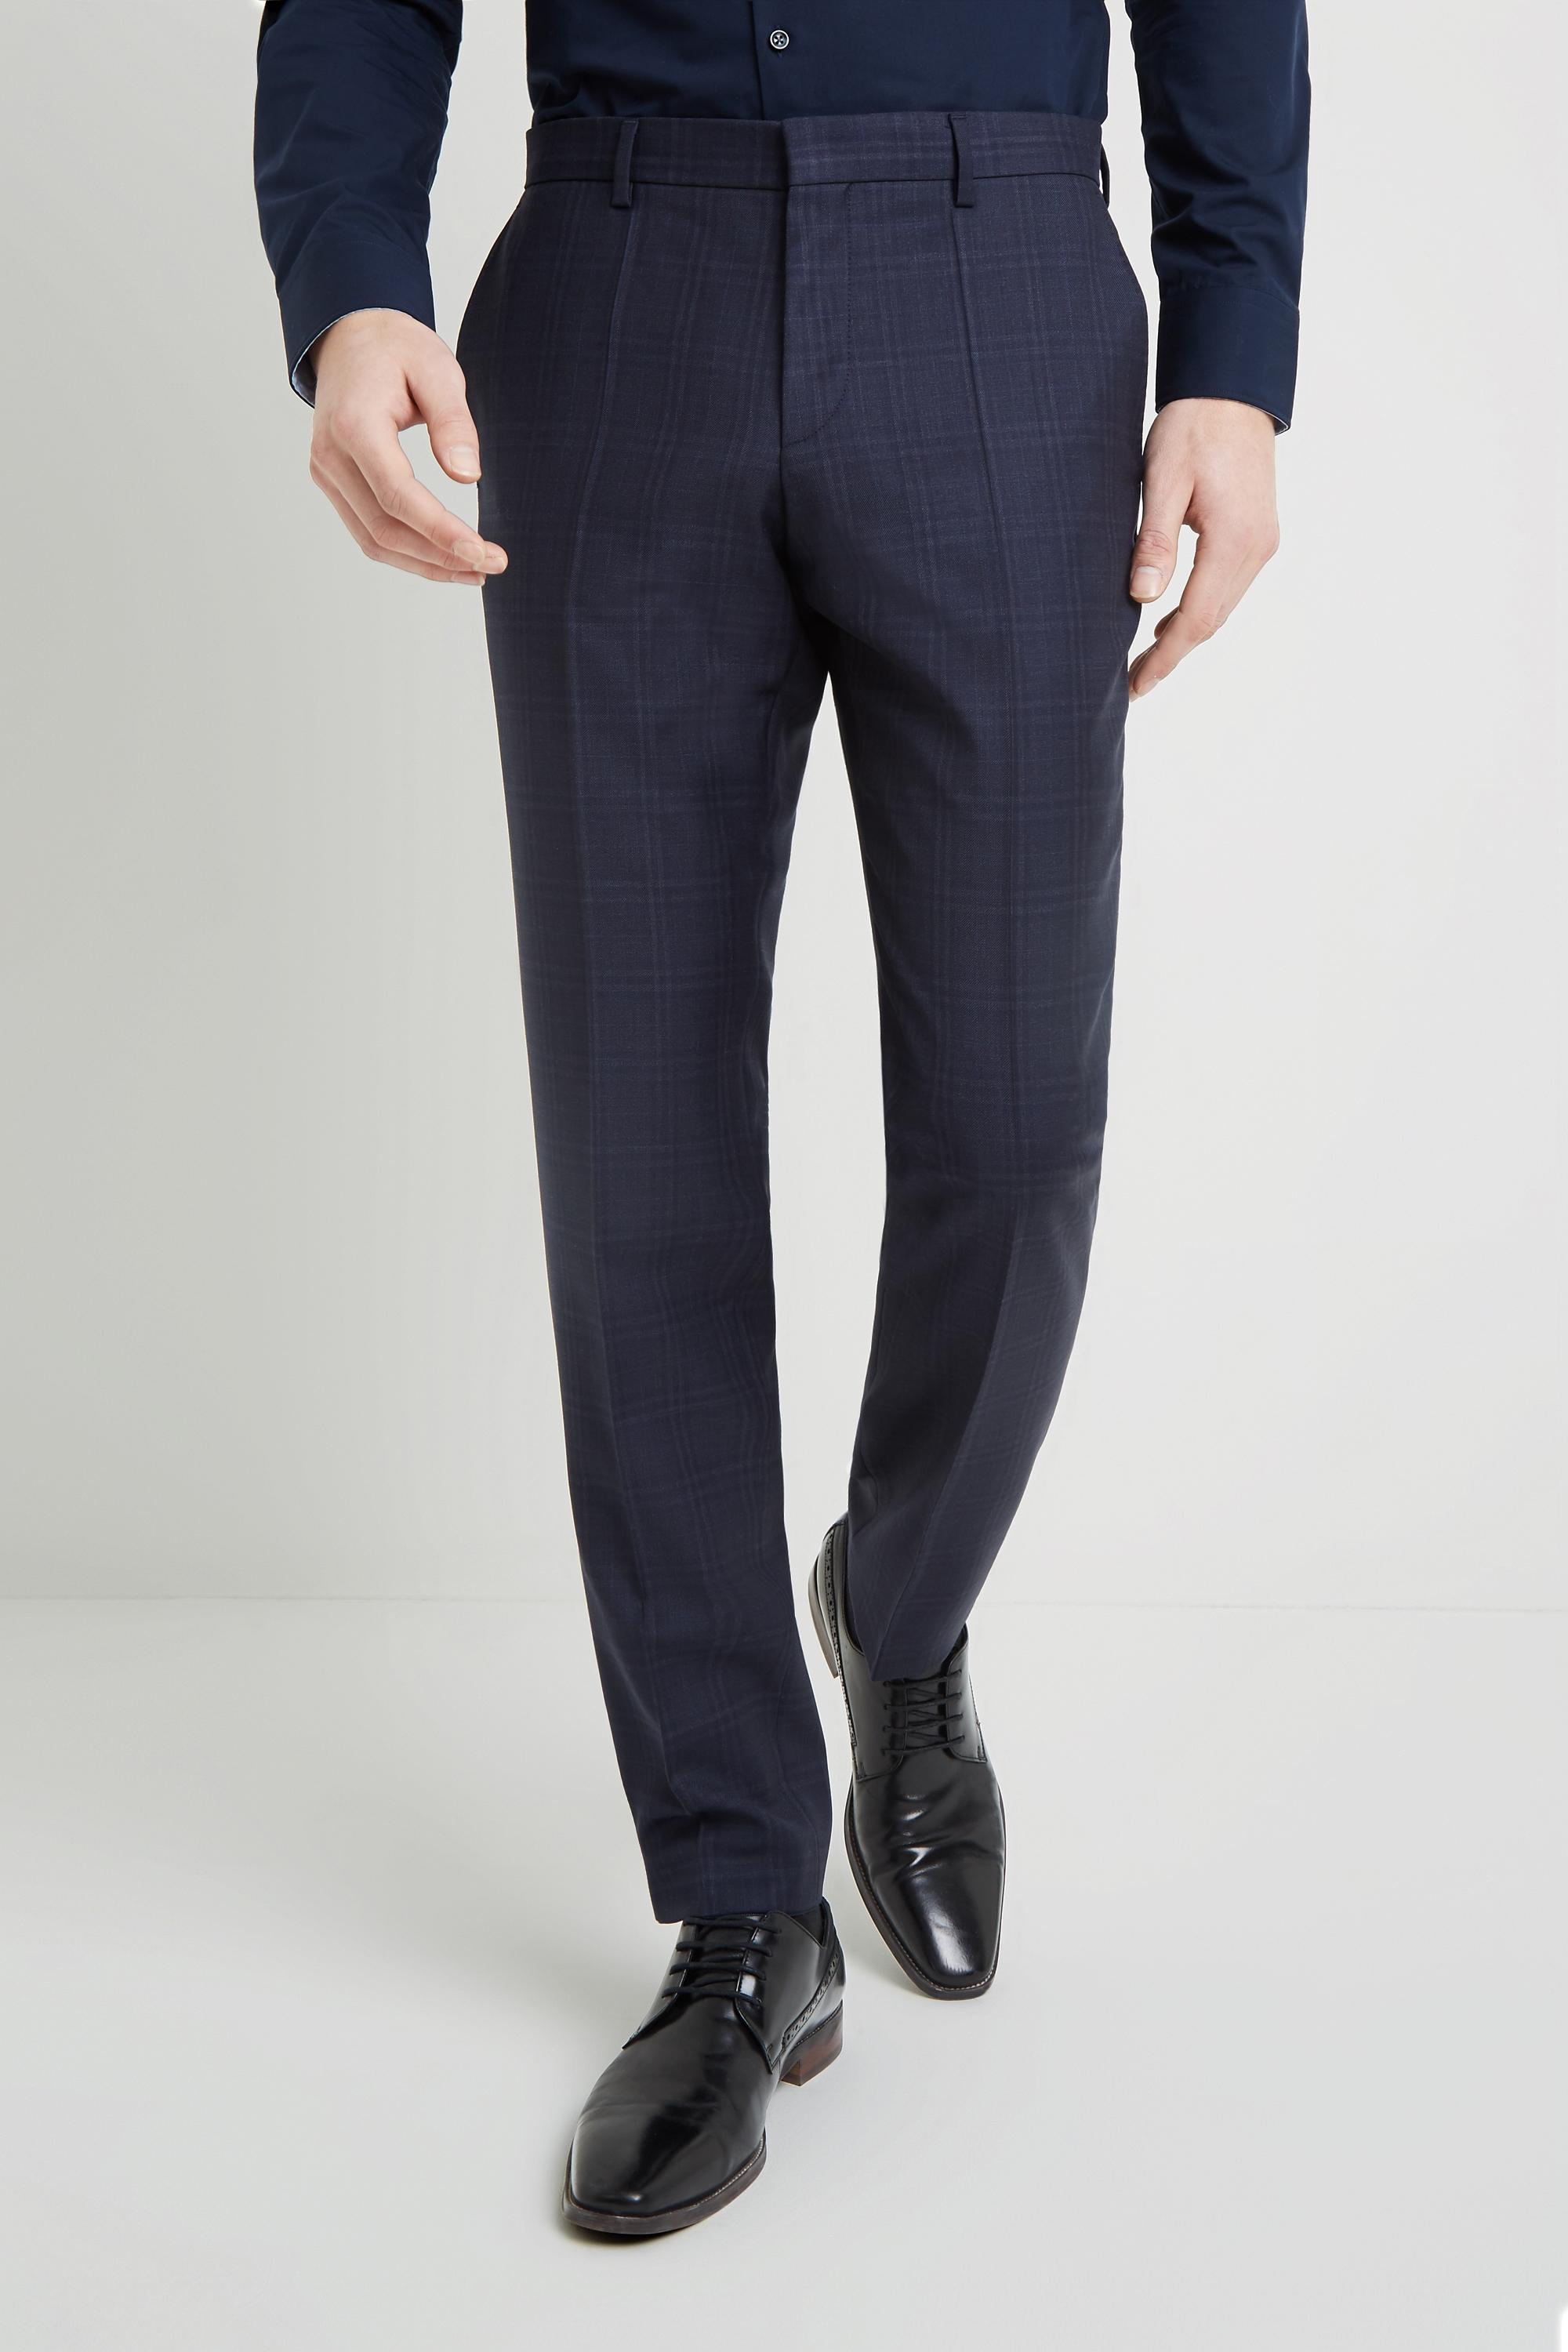 Lyst - HUGO Slim Fit Navy Shadow Check Trousers in Blue for Men